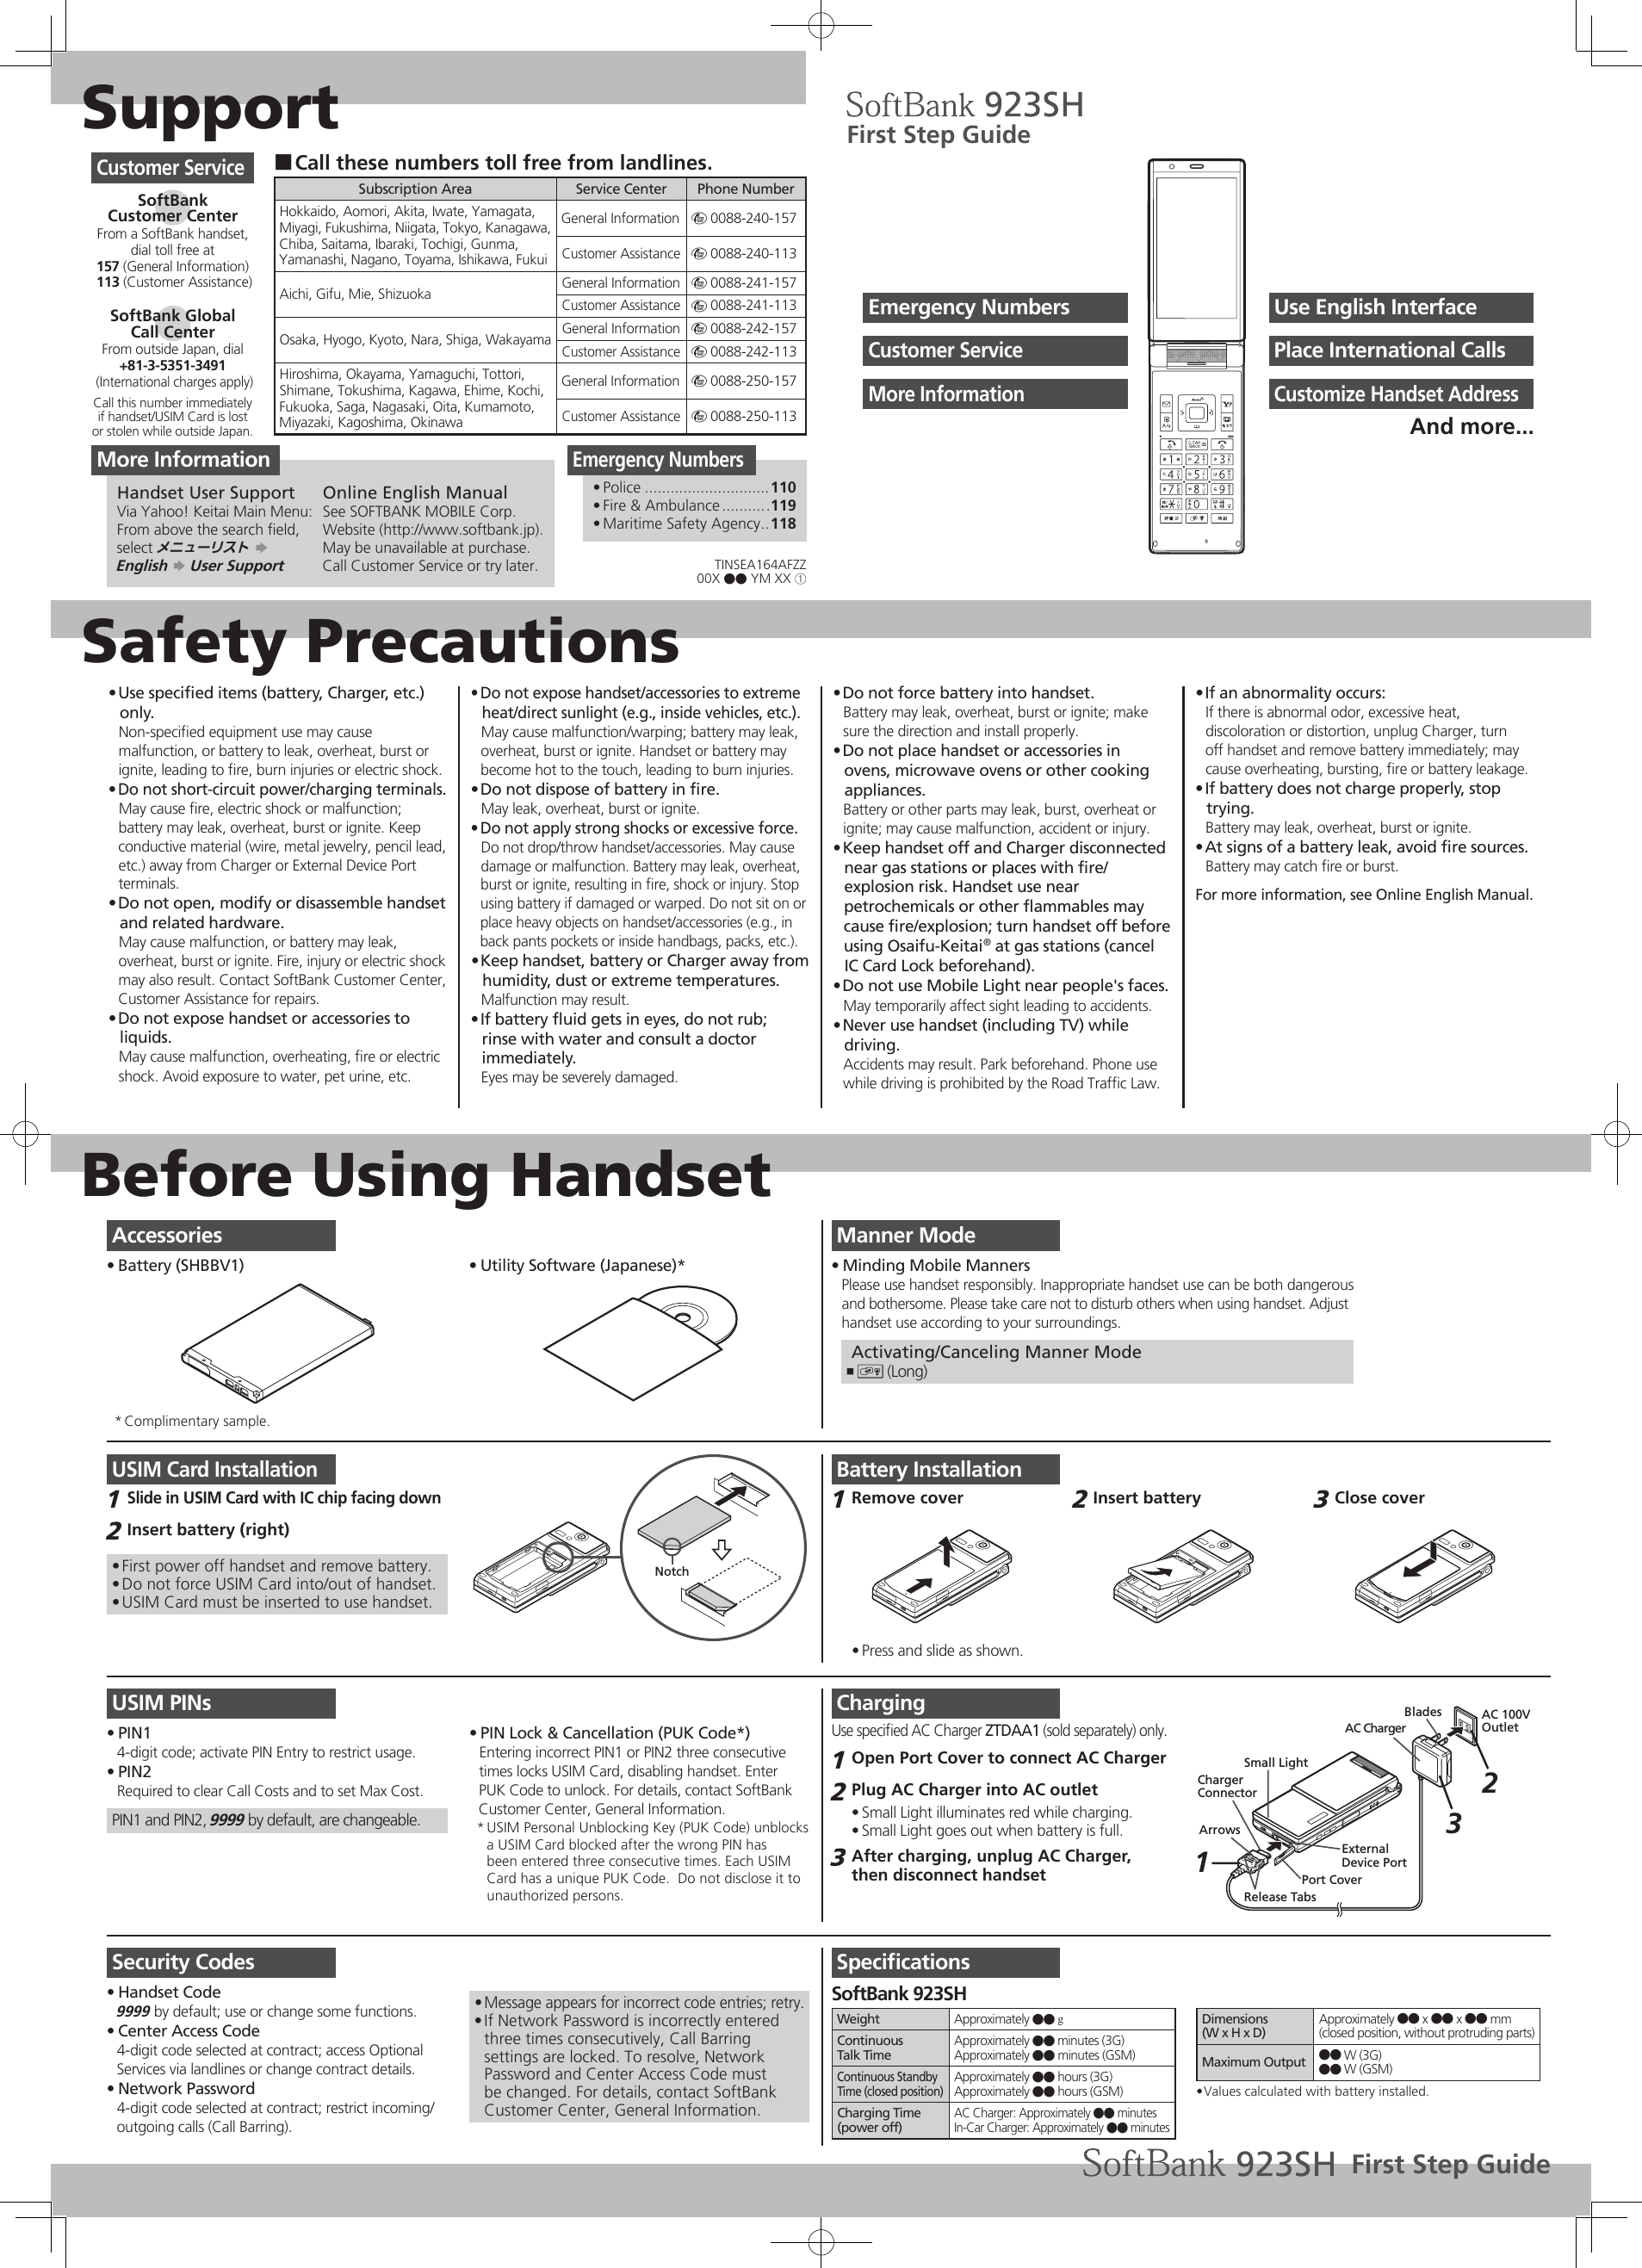 SupportSafety PrecautionsBefore Using HandsetUse speciﬁed items (battery, Charger, etc.) • only.Non-speciﬁed equipment use may cause malfunction, or battery to leak, overheat, burst or ignite, leading to ﬁre, burn injuries or electric shock.Do not short-circuit power/charging terminals.• May cause ﬁre, electric shock or malfunction; battery may leak, overheat, burst or ignite. Keep conductive material (wire, metal jewelry, pencil lead, etc.) away from Charger or External Device Port terminals.Do not open, modify or disassemble handset • and related hardware.May cause malfunction, or battery may leak, overheat, burst or ignite. Fire, injury or electric shock may also result. Contact SoftBank Customer Center, Customer Assistance for repairs.Do not expose handset or accessories to • liquids.May cause malfunction, overheating, ﬁre or electric shock. Avoid exposure to water, pet urine, etc.Do not expose handset/accessories to extreme • heat/direct sunlight (e.g., inside vehicles, etc.).May cause malfunction/warping; battery may leak, overheat, burst or ignite. Handset or battery may become hot to the touch, leading to burn injuries.Do not dispose of battery in ﬁre.• May leak, overheat, burst or ignite.Do not apply strong shocks or excessive force.• Do not drop/throw handset/accessories. May cause damage or malfunction. Battery may leak, overheat, burst or ignite, resulting in ﬁre, shock or injury. Stop using battery if damaged or warped. Do not sit on or place heavy objects on handset/accessories (e.g., in back pants pockets or inside handbags, packs, etc.).Keep handset, battery or Charger away from • humidity, dust or extreme temperatures.Malfunction may result.If battery ﬂuid gets in eyes, do not rub; • rinse with water and consult a doctor immediately.Eyes may be severely damaged.Do not force battery into handset.• Battery may leak, overheat, burst or ignite; make sure the direction and install properly.Do not place handset or accessories in • ovens, microwave ovens or other cooking appliances.Battery or other parts may leak, burst, overheat or ignite; may cause malfunction, accident or injury.Keep handset off and Charger disconnected  • near gas stations or places with ﬁre/explosion risk. Handset use near petrochemicals or other ﬂammables may cause ﬁre/explosion; turn handset off before using Osaifu-Keitai® at gas stations (cancel IC Card Lock beforehand).Do not use Mobile Light near people&apos;s faces.• May temporarily affect sight leading to accidents.Never use handset (including TV) while • driving.Accidents may result. Park beforehand. Phone use while driving is prohibited by the Road Trafﬁc Law.If an abnormality occurs:• If there is abnormal odor, excessive heat, discoloration or distortion, unplug Charger, turn off handset and remove battery immediately; may cause overheating, bursting, ﬁre or battery leakage.If battery does not charge properly, stop • trying.Battery may leak, overheat, burst or ignite.At signs of a battery leak, avoid ﬁre sources.• Battery may catch ﬁre or burst.For more information, see Online English Manual.Manner ModeMinding Mobile Manners• Please use handset responsibly. Inappropriate handset use can be both dangerousand bothersome. Please take care not to disturb others when using handset. Adjusthandset use according to your surroundings. Activating/Canceling Manner Mode) ,  (Long)USIM Card InstallationSlide in USIM Card with IC chip facing down1 Insert battery (right)2 First power off handset and remove battery.• Do not force USIM Card into/out of handset.• USIM Card must be inserted to use handset.• NotchUSIM PINsPIN1• 4-digit code; activate PIN Entry to restrict usage.PIN2• Required to clear Call Costs and to set Max Cost.PIN1 and PIN2, 9999 by default, are changeable.PIN Lock &amp; Cancellation (PUK Code*)• Entering incorrect PIN1 or PIN2 three consecutivetimes locks USIM Card, disabling handset. EnterPUK Code to unlock. For details, contact SoftBank Customer Center, General Information.USIM Personal Unblocking Key (PUK Code) unblocks * a USIM Card blocked after the wrong PIN has been entered three consecutive times. Each USIM Card has a unique PUK Code.  Do not disclose it to unauthorized persons.Security CodesHandset Code• 9999 by default; use or change some functions.Center Access Code• 4-digit code selected at contract; access Optional Services via landlines or change contract details.Network Password• 4-digit code selected at contract; restrict incoming/outgoing calls (Call Barring).Message appears for incorrect code entries; retry.• If Network Password is incorrectly entered • three times consecutively, Call Barring settings are locked. To resolve, Network Password and Center Access Code must be changed. For details, contact SoftBank Customer Center, General Information.Battery InstallationRemove cover1 Press and slide as shown.• Insert battery2 Close cover3 ChargingUse speciﬁed AC Charger ZTDAA1 (sold separately) only.Open Port Cover to connect AC Charger1 Plug AC Charger into AC outlet2 Small Light illuminates red while charging.• Small Light goes out when battery is full.• After charging, unplug AC Charger, 3 then disconnect handsetBladesPort CoverRelease TabsExternal Device PortArrowsSmall LightCharger ConnectorAC Charger1AC 100VOutlet23SpeciﬁcationsSoftBank 923SHWeight Approximately ●● gContinuousTalk TimeApproximately ●● minutes (3G)Approximately ●● minutes (GSM)Continuous Standby Time (closed position)Approximately ●● hours (3G)Approximately ●● hours (GSM)Charging Time(power off)AC Charger: Approximately ●● minutesIn-Car Charger: Approximately ●● minutesDimensions(W x H x D)Approximately ●● x ●● x ●● mm (closed position, without protruding parts)Maximum Output ●● W (3G)●● W (GSM)Values calculated with battery installed.• Call these numbers toll free from landlines. ■Subscription Area Service Center Phone NumberHokkaido, Aomori, Akita, Iwate, Yamagata, Miyagi, Fukushima, Niigata, Tokyo, Kanagawa, Chiba, Saitama, Ibaraki, Tochigi, Gunma, Yamanashi, Nagano, Toyama, Ishikawa, FukuiGeneral Information m 0088-240-157Customer Assistance m 0088-240-113Aichi, Gifu, Mie, Shizuoka General Information m 0088-241-157Customer Assistance m 0088-241-113Osaka, Hyogo, Kyoto, Nara, Shiga, Wakayama General Information m 0088-242-157Customer Assistance m 0088-242-113Hiroshima, Okayama, Yamaguchi, Tottori, Shimane, Tokushima, Kagawa, Ehime, Kochi, Fukuoka, Saga, Nagasaki, Oita, Kumamoto, Miyazaki, Kagoshima, OkinawaGeneral Information m 0088-250-157Customer Assistance m 0088-250-113Customer ServiceSoftBank  Customer CenterFrom a SoftBank handset, dial toll free at157 (General Information) 113 (Customer Assistance)SoftBank Global  Call CenterFrom outside Japan, dial+81-3-5351-3491 (International charges apply)Call this number immediatelyif handset/USIM Card is lostor stolen while outside Japan.Emergency NumbersPolice•   .............................110Fire &amp; Ambulance•   ...........119Maritime Safety Agency•   ..118First Step GuideUse English InterfaceEmergency NumbersPlace International CallsCustomer ServiceCustomize Handset AddressMore InformationAnd more...AccessoriesBattery (SHBBV1)•  Utility Software (Japanese)*• Complimentary sample.* More InformationHandset User SupportVia Yahoo! Keitai Main Menu:From above the search ﬁeld, select メニューリスト S  English S User SupportOnline English ManualSee SOFTBANK MOBILE Corp. Website (http://www.softbank.jp).May be unavailable at purchase. Call Customer Service or try later.First Step GuideTINSEA164AFZZ00X ●● YM XX ①